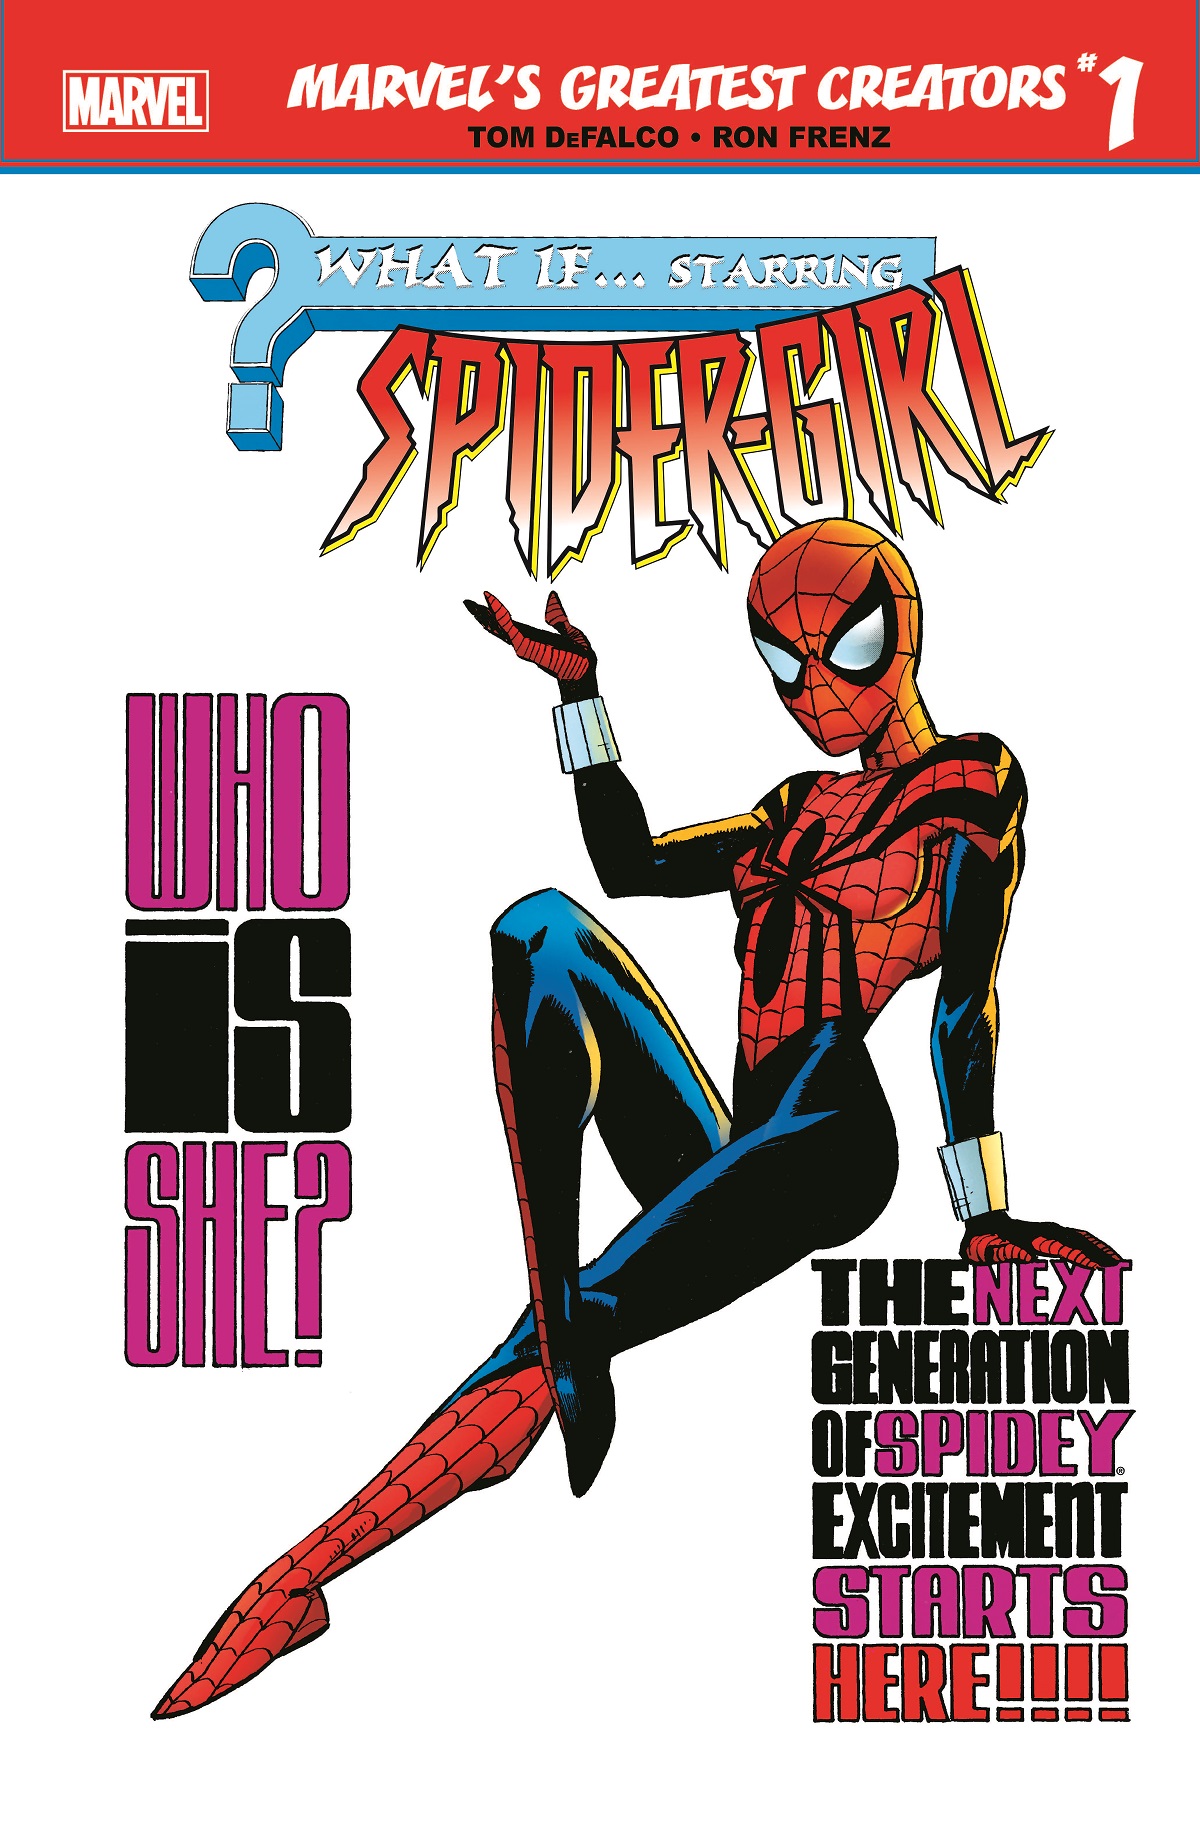 Marvel's Greatest Creators: What If? - Spider-Girl (2019) #1